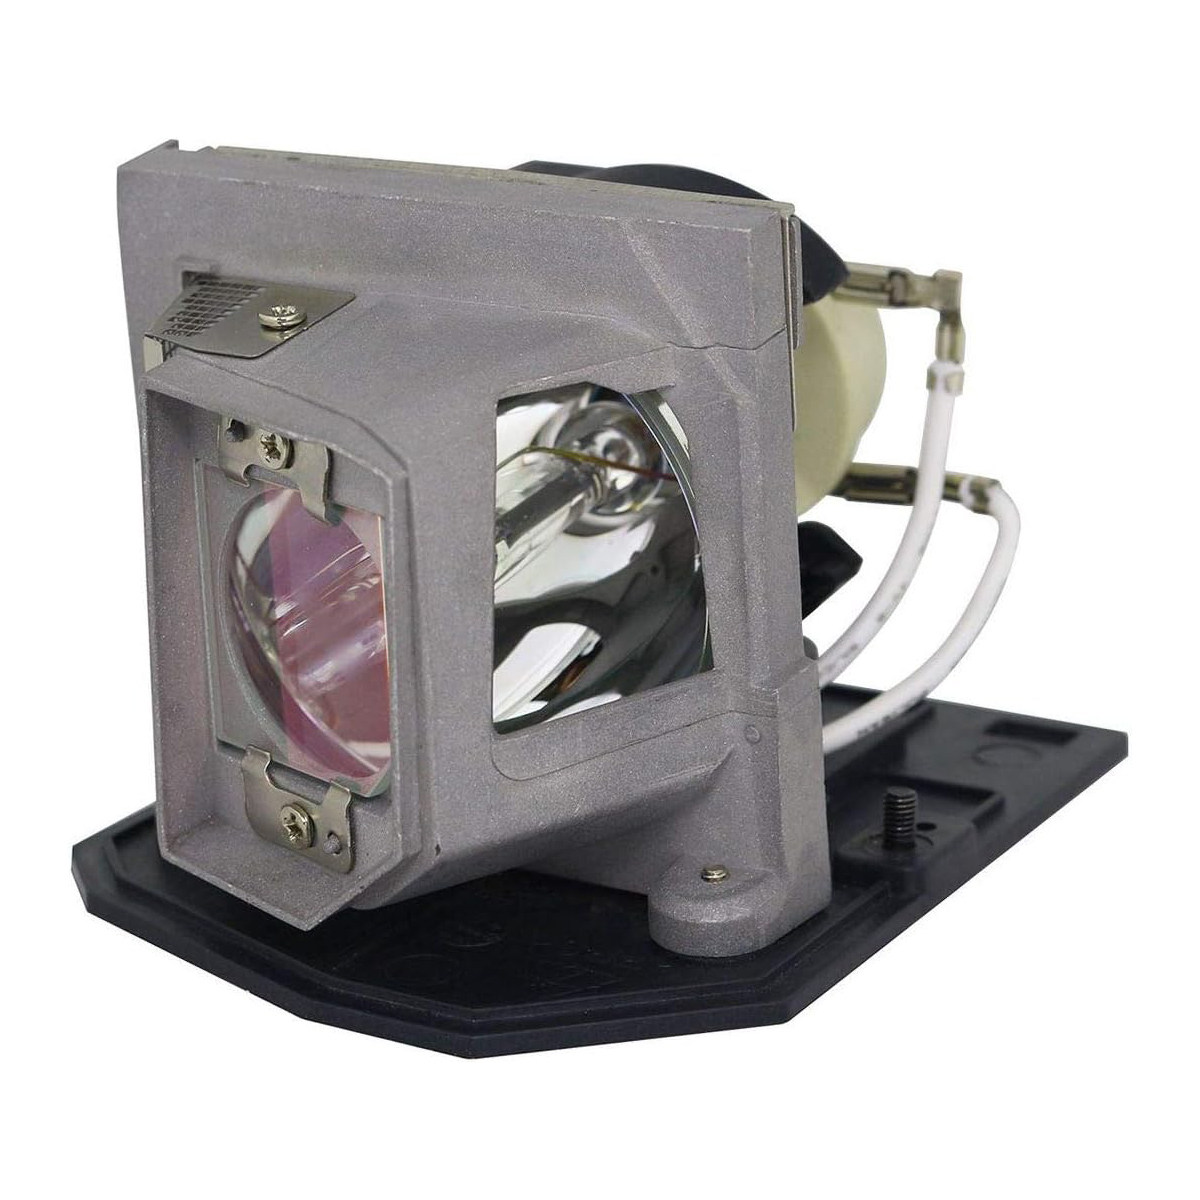 Replacement Projector lamp EC.K0700.001 For ACER H5360 H5360BD V700